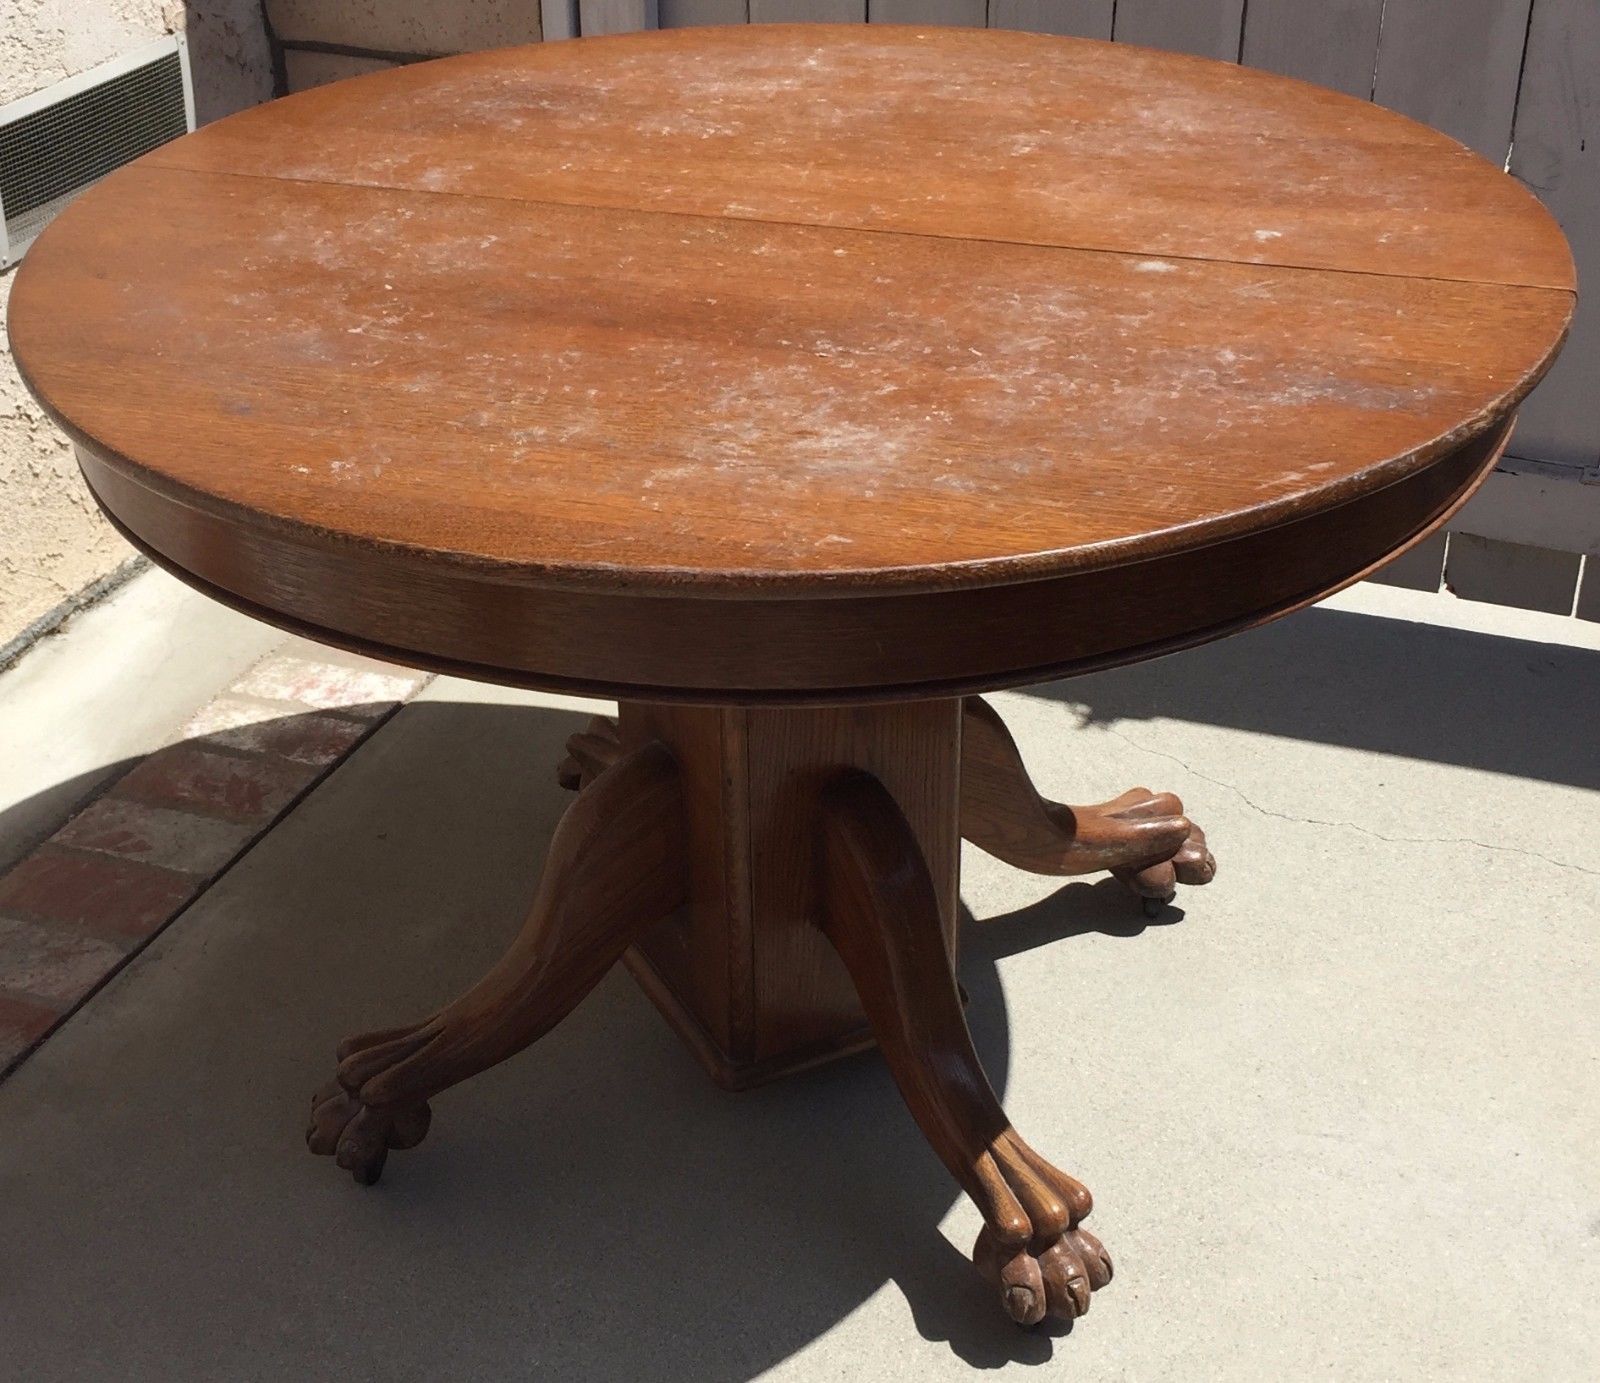 Antique Round Oak Claw Foot Dining or Kitchen Table w/4 Leaf Vintage